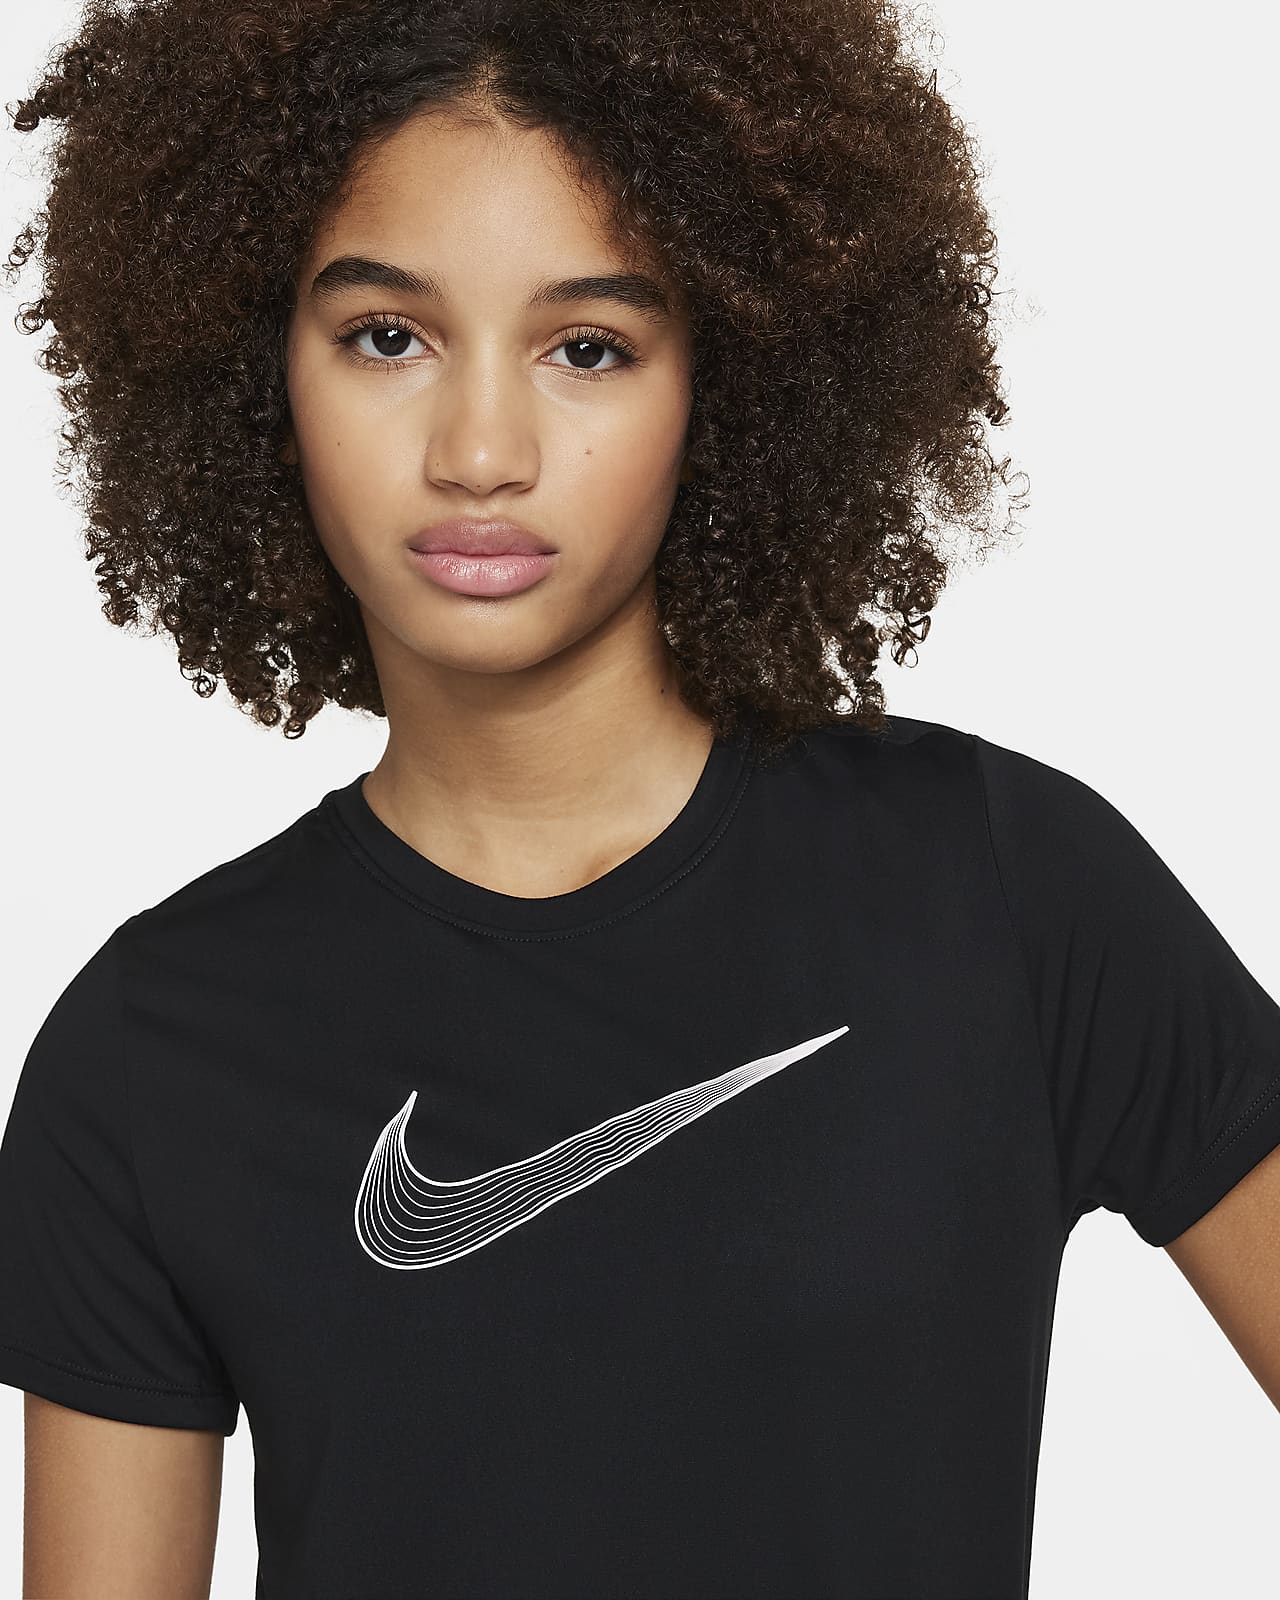 Nike One Fille